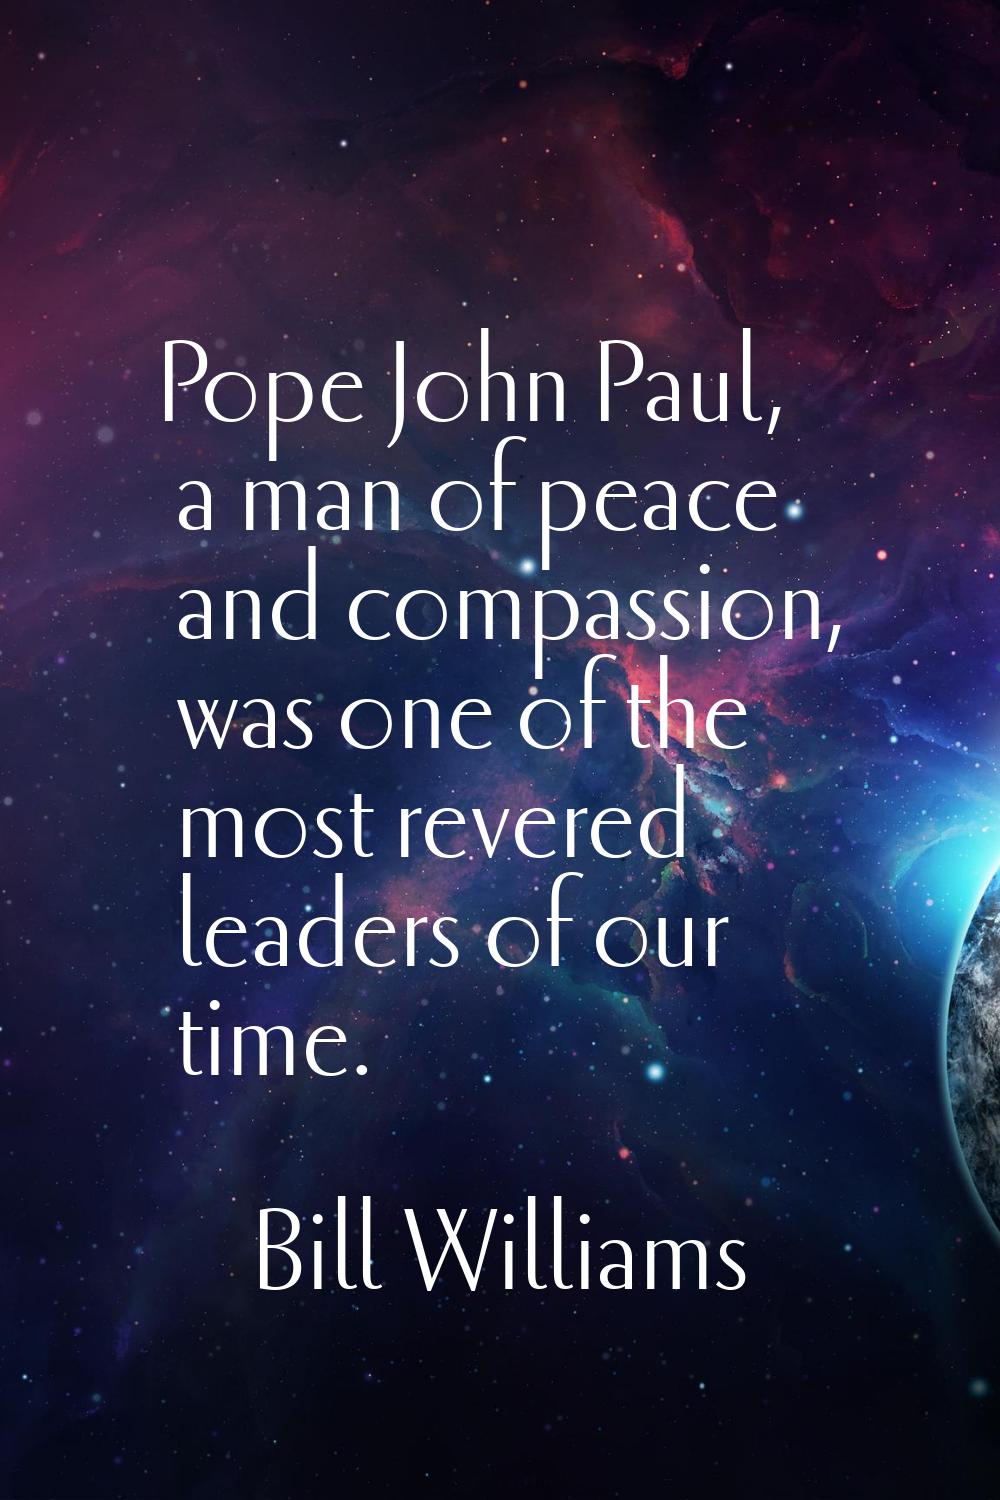 Pope John Paul, a man of peace and compassion, was one of the most revered leaders of our time.